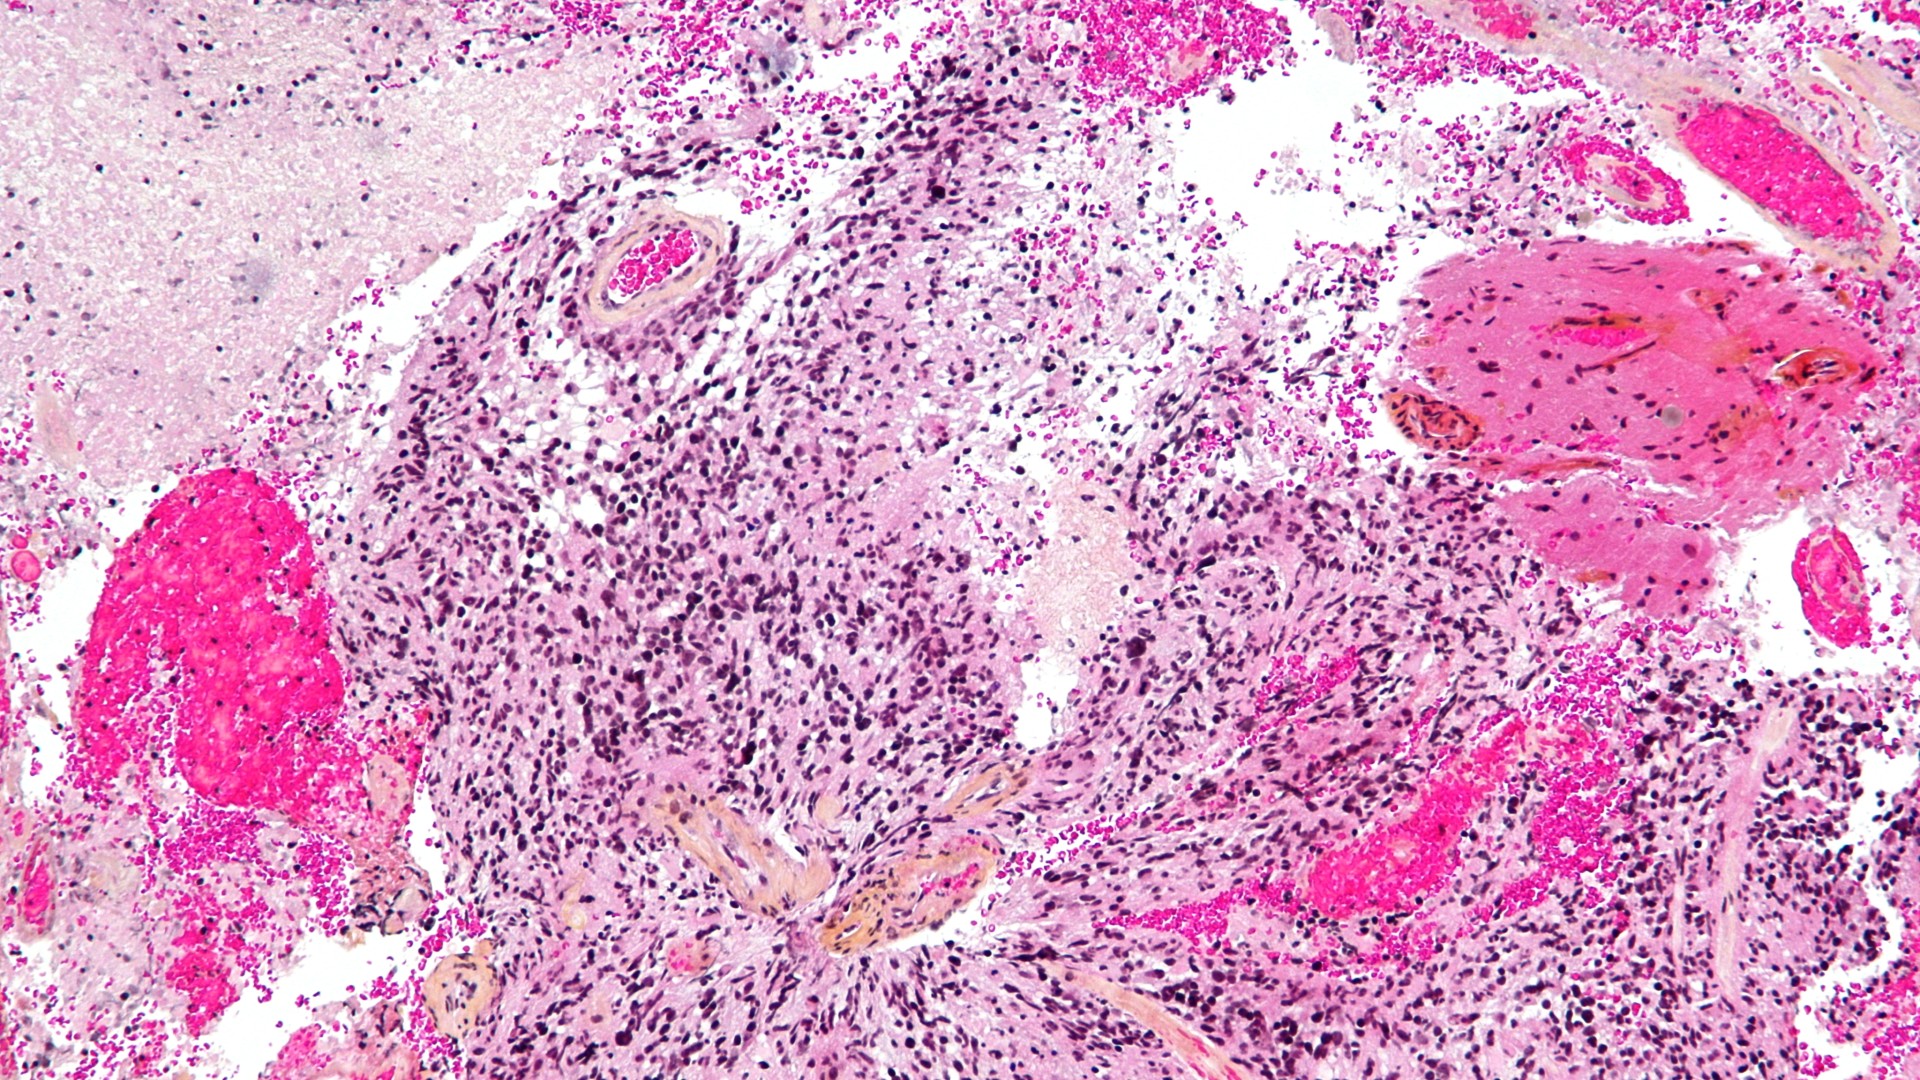 Multi-colored microscope image of glioblastoma up close under the microscope. There's lots of black spots dotted around the image, with larger, circular hot pink patches, as well as lighter pink and light yellow patches of different shapes/sizes. White gaps are seen between them.